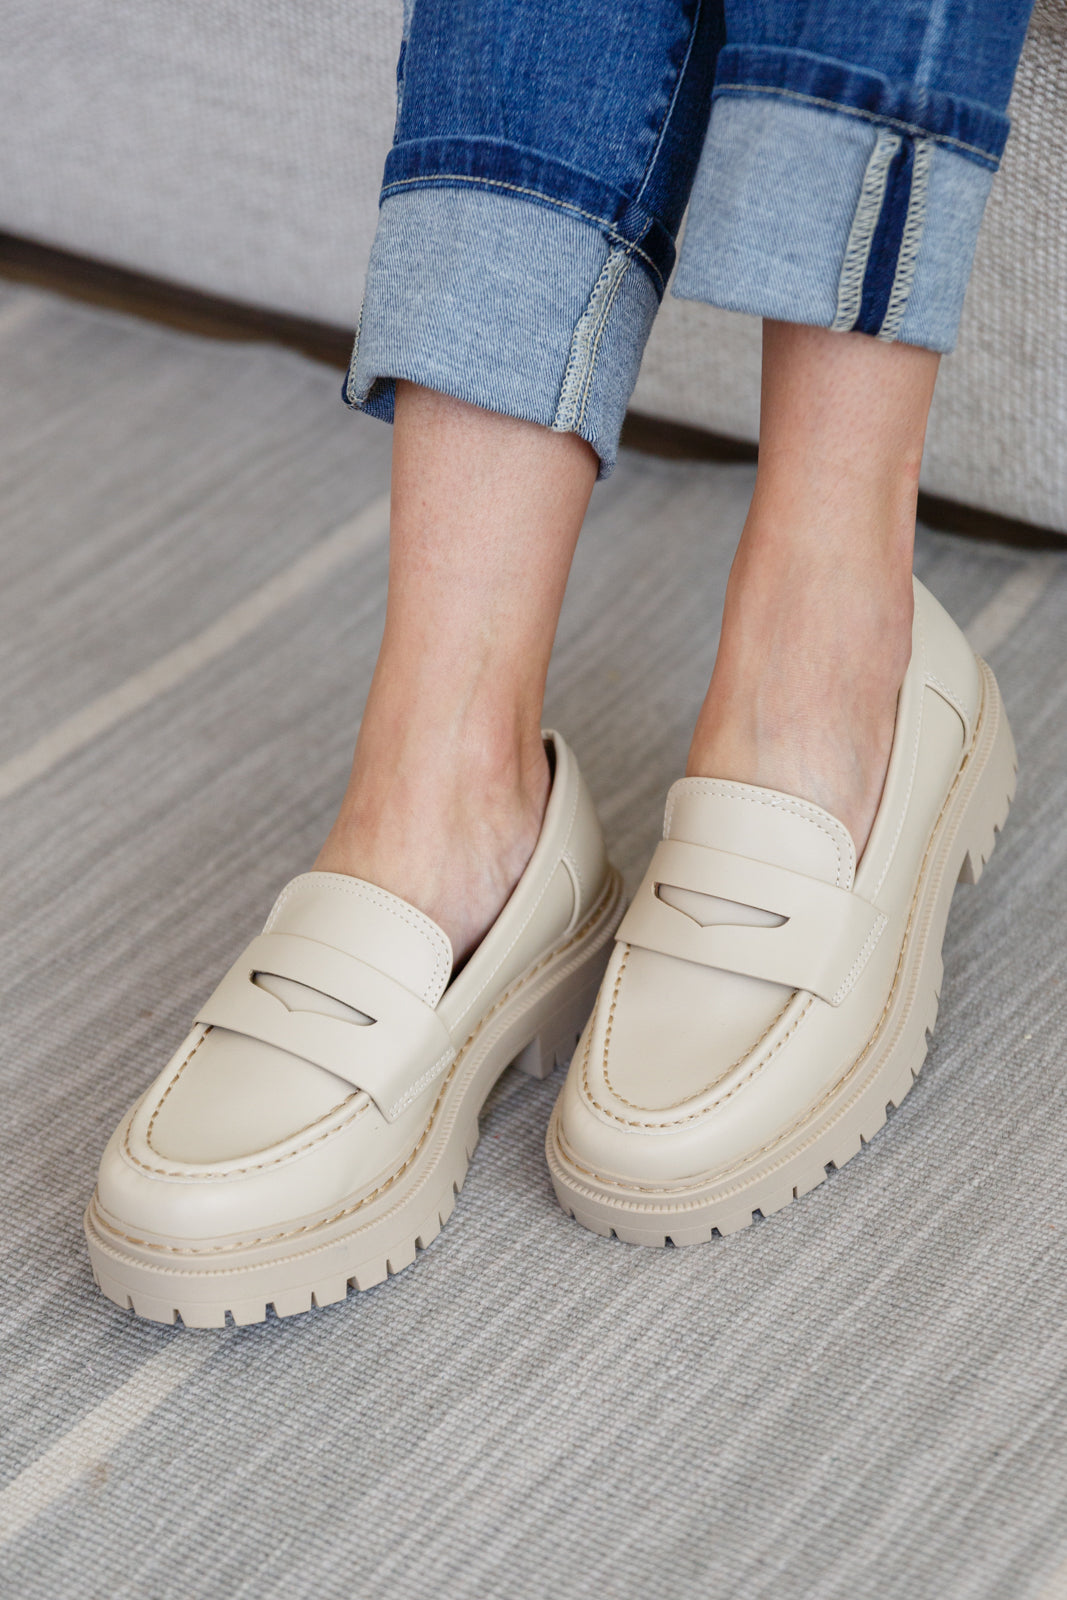 Penny For Your Thoughts Loafers in Bone- 1/2